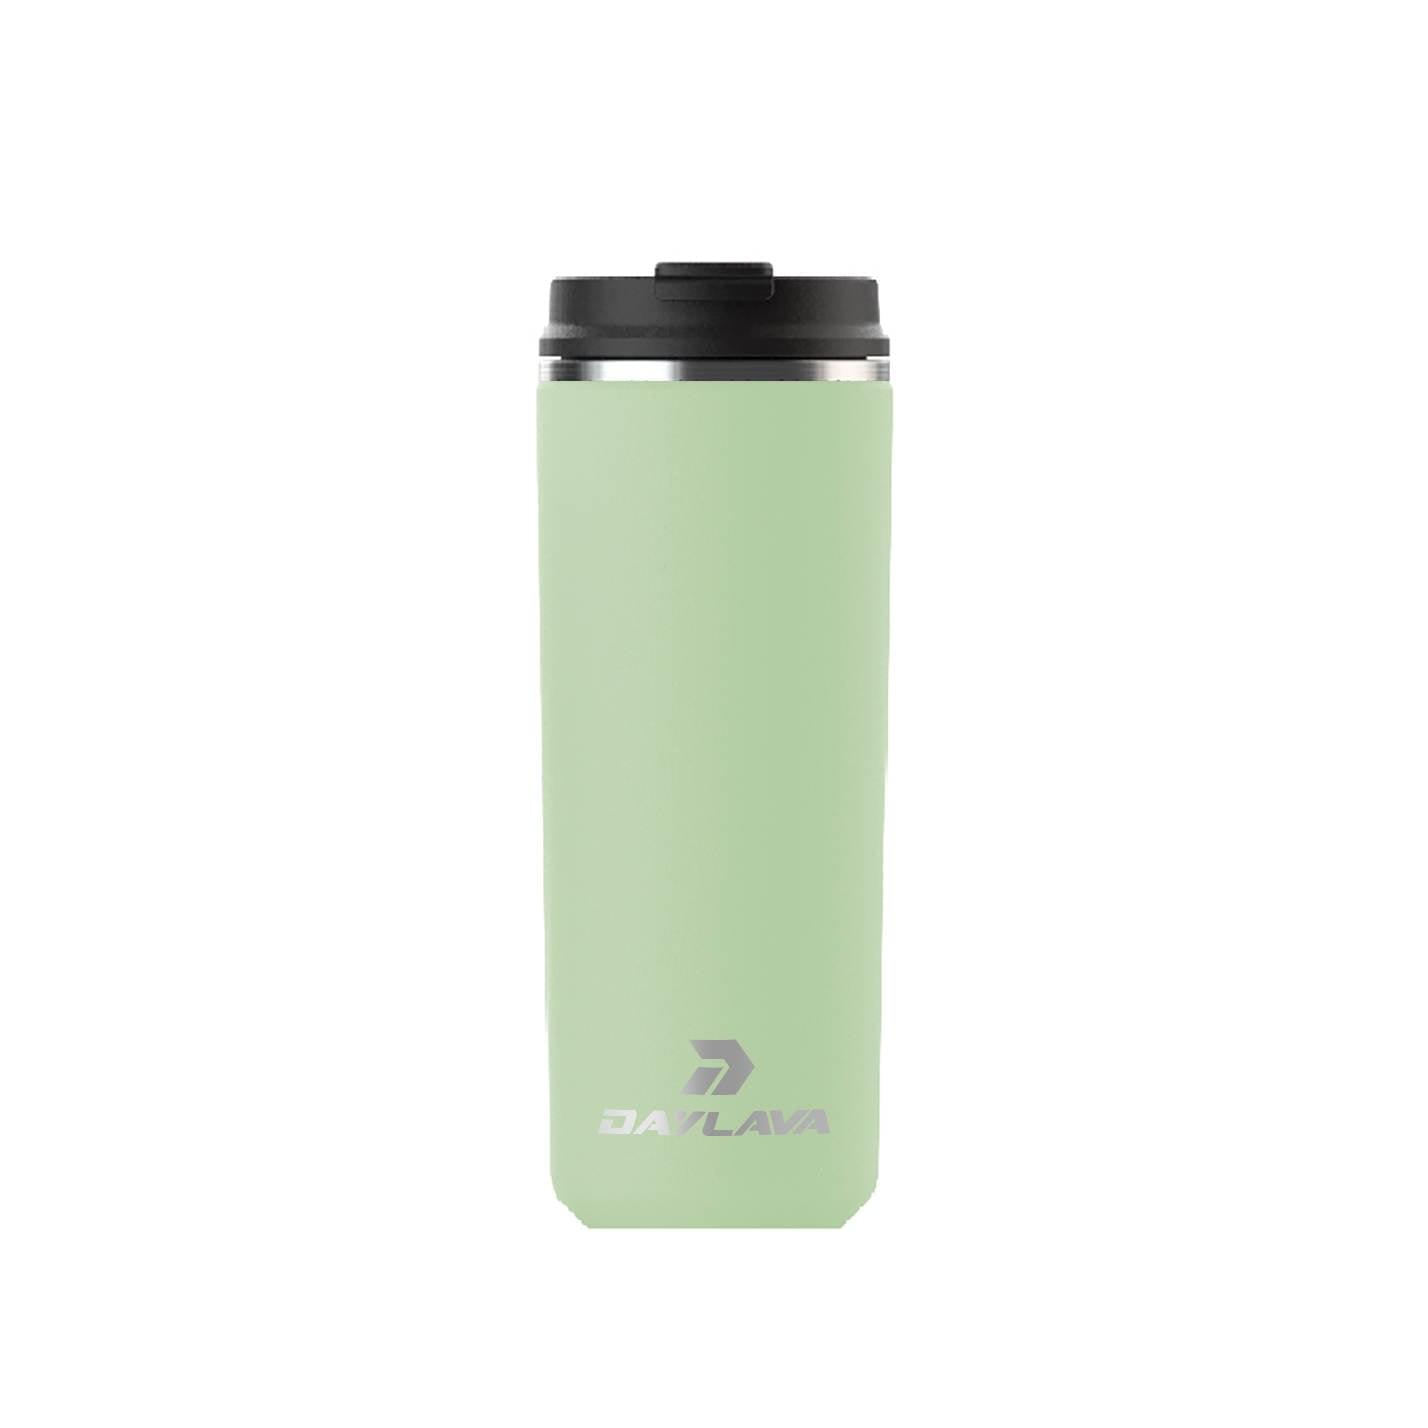 16oz Coffee Tumbler- Lime - DayLava - Hydration on the GO! - The Perfect Drinkware Solution.